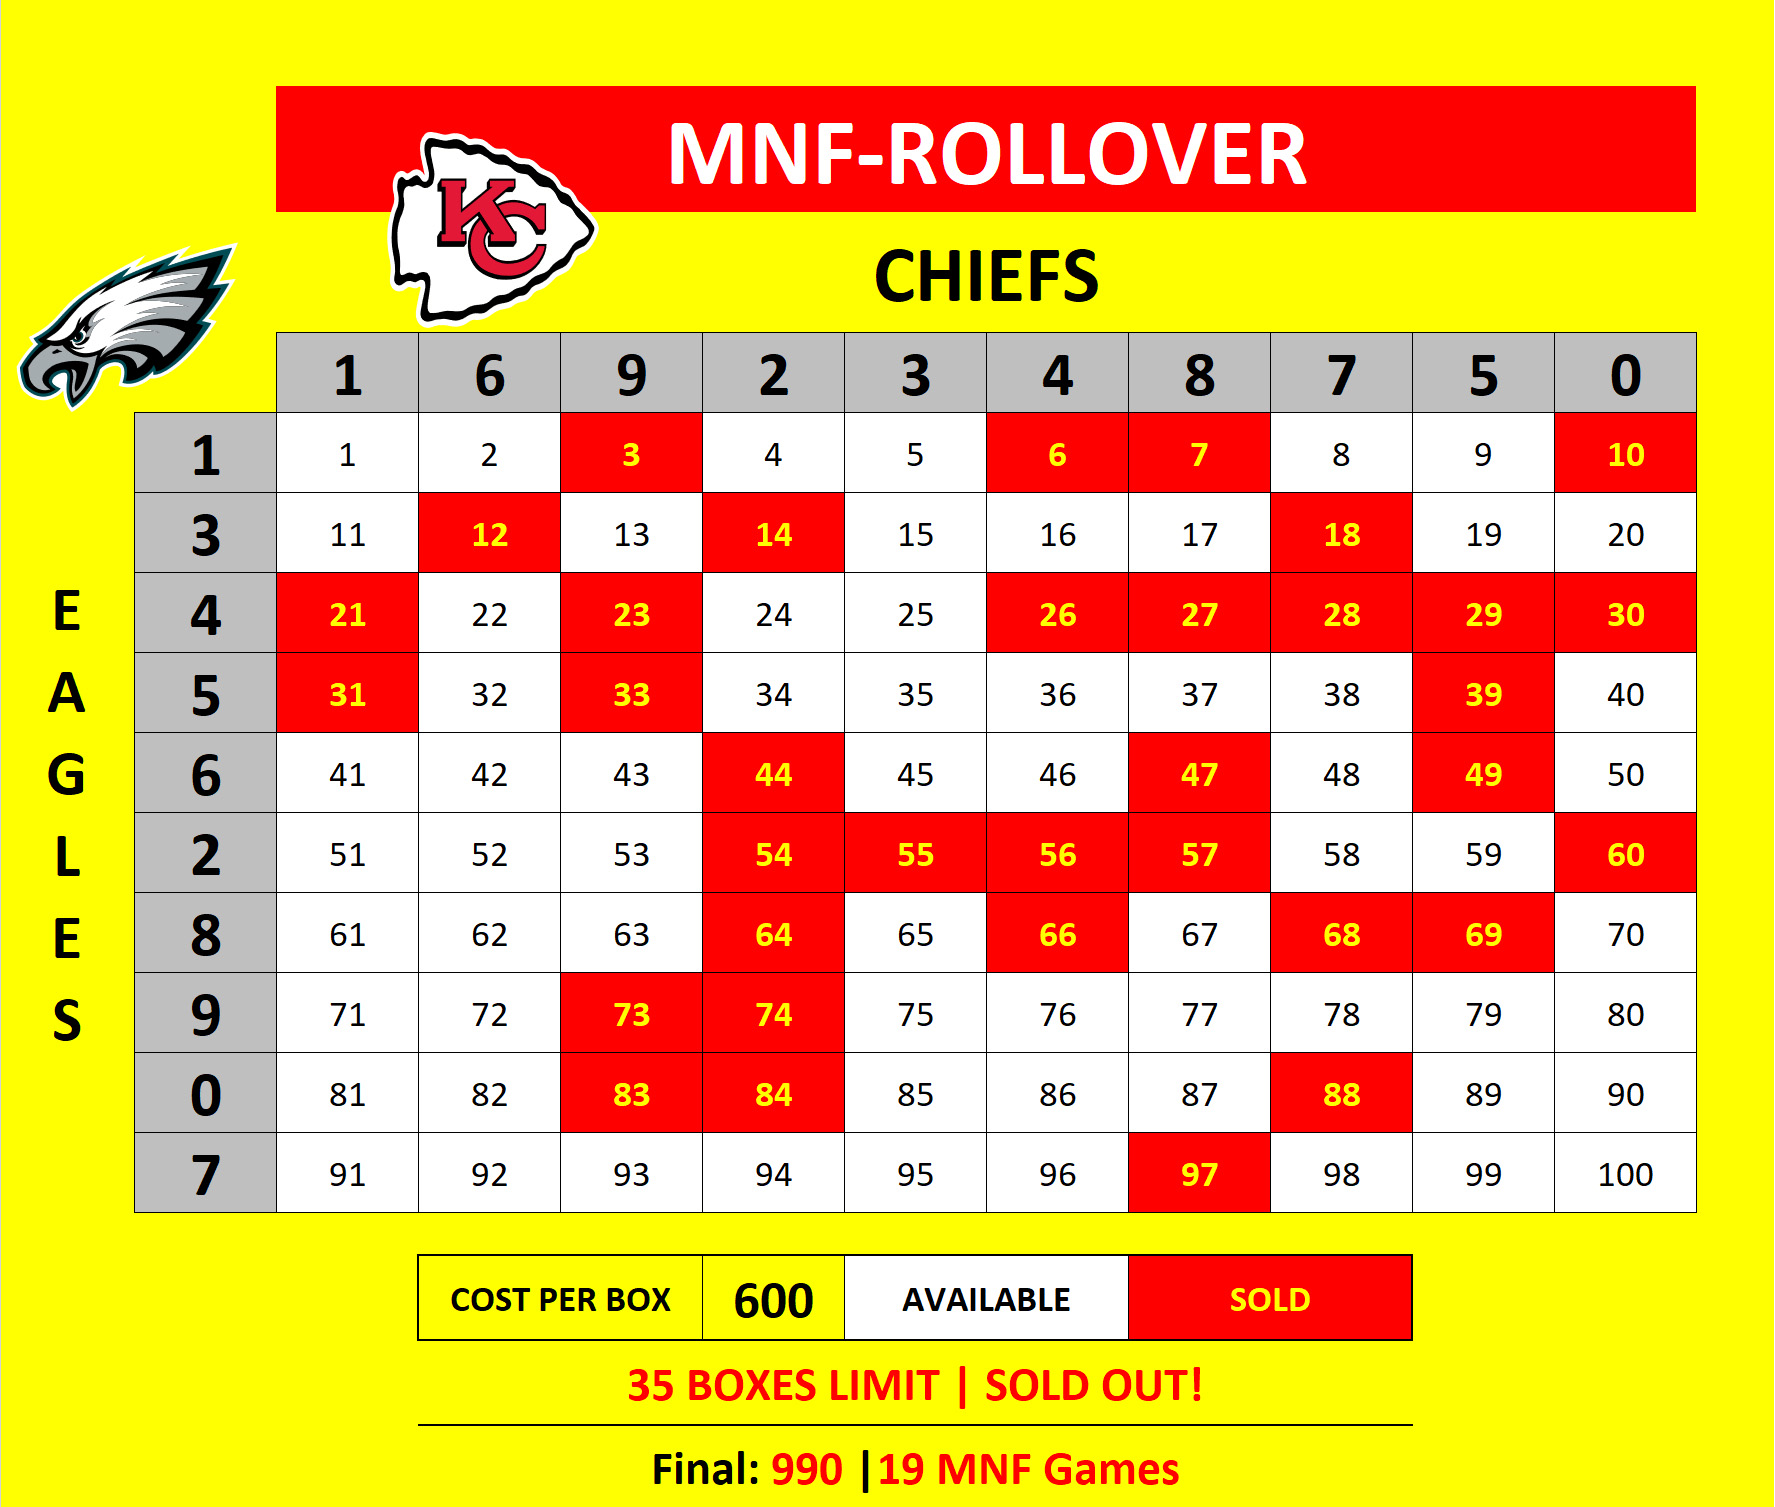 MNF-Rollover-B Eagles at Chiefs